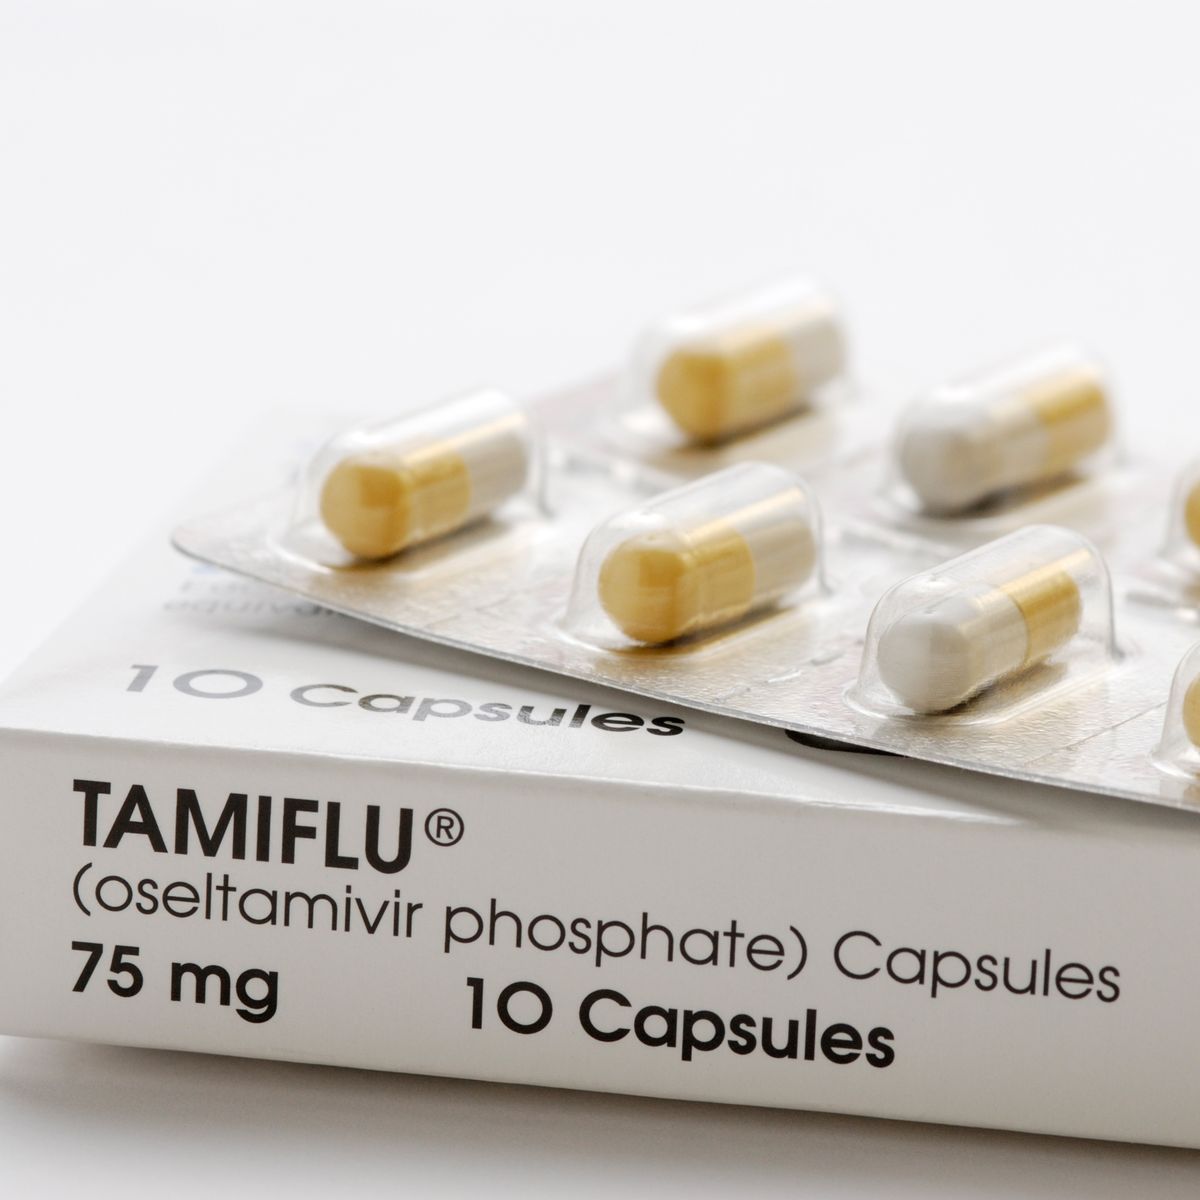 Tamiflu (oseltamivir phosphate), an antiviral medication used to treat influenza A and influenza B including swine flu and avian flu.